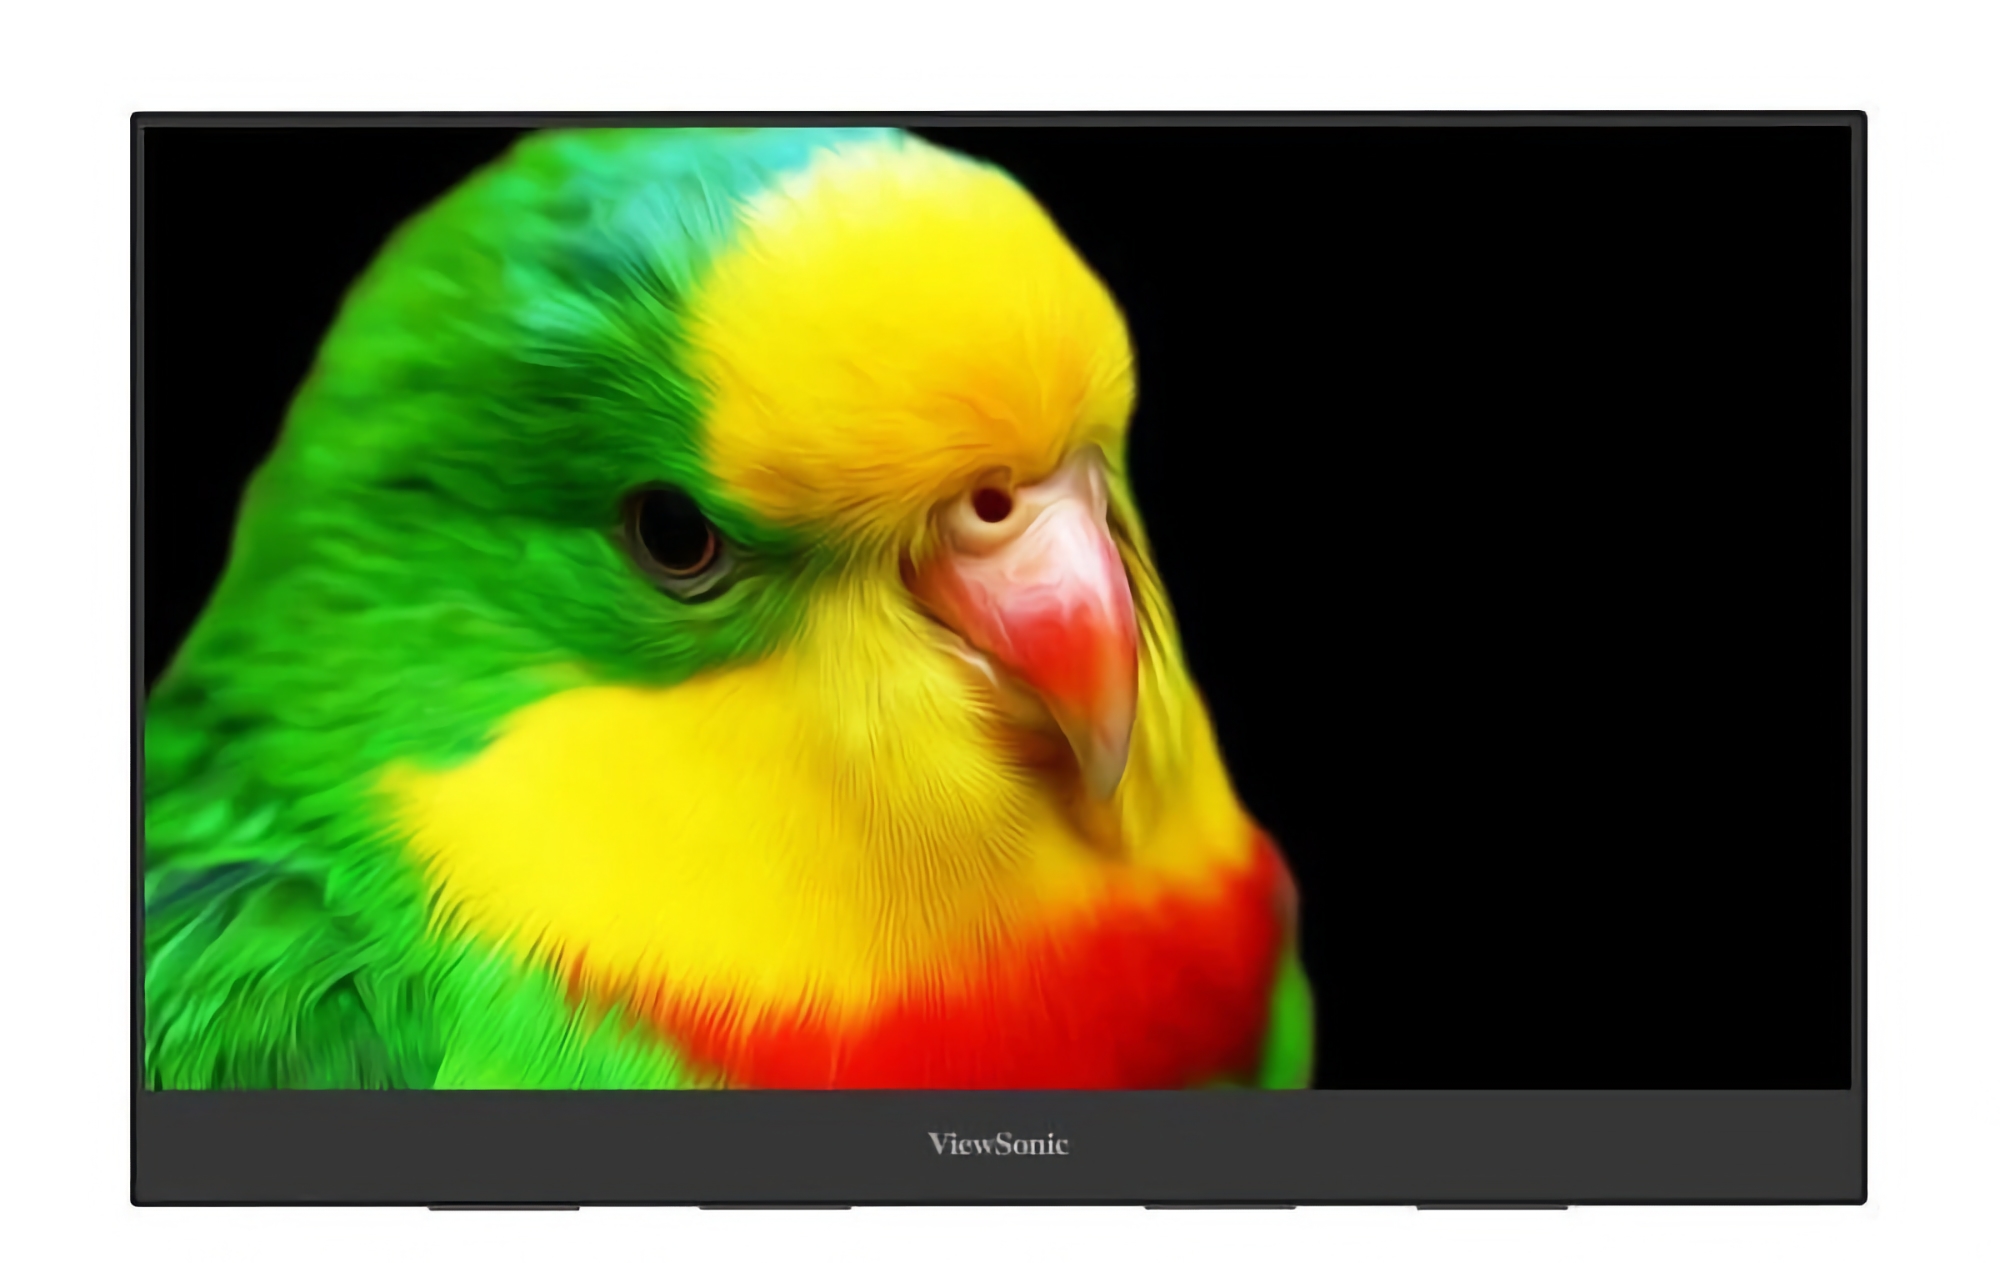 ViewSonic unveils 15.6-inch portable 4K monitor with OLED screen